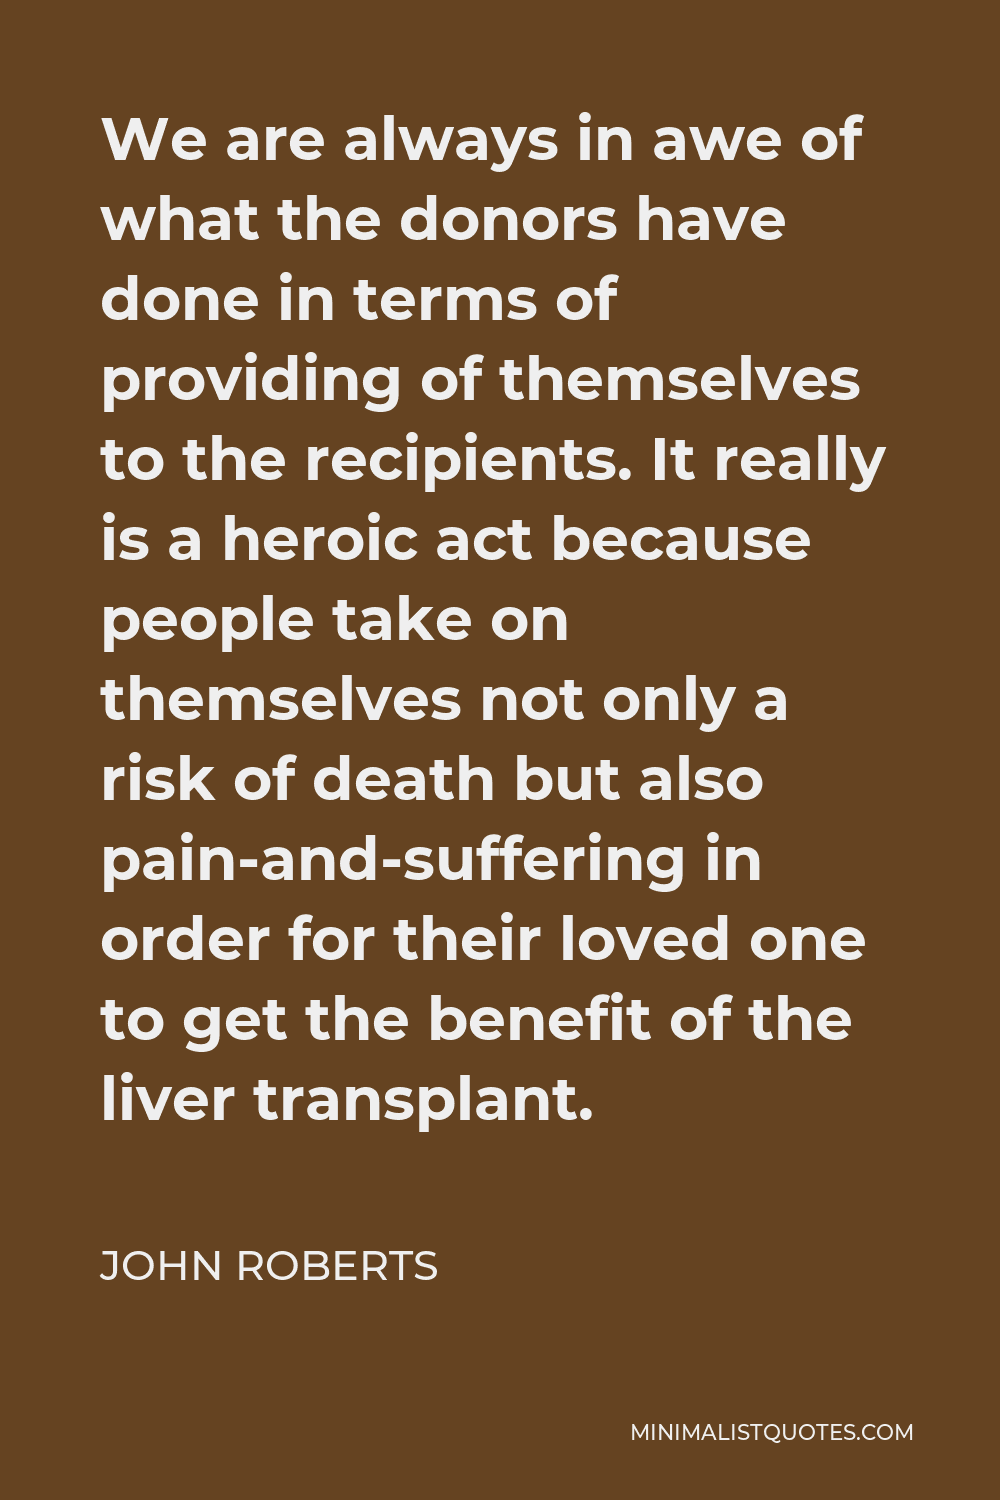 John Roberts Quote - We are always in awe of what the donors have done in terms of providing of themselves to the recipients. It really is a heroic act because people take on themselves not only a risk of death but also pain-and-suffering in order for their loved one to get the benefit of the liver transplant.